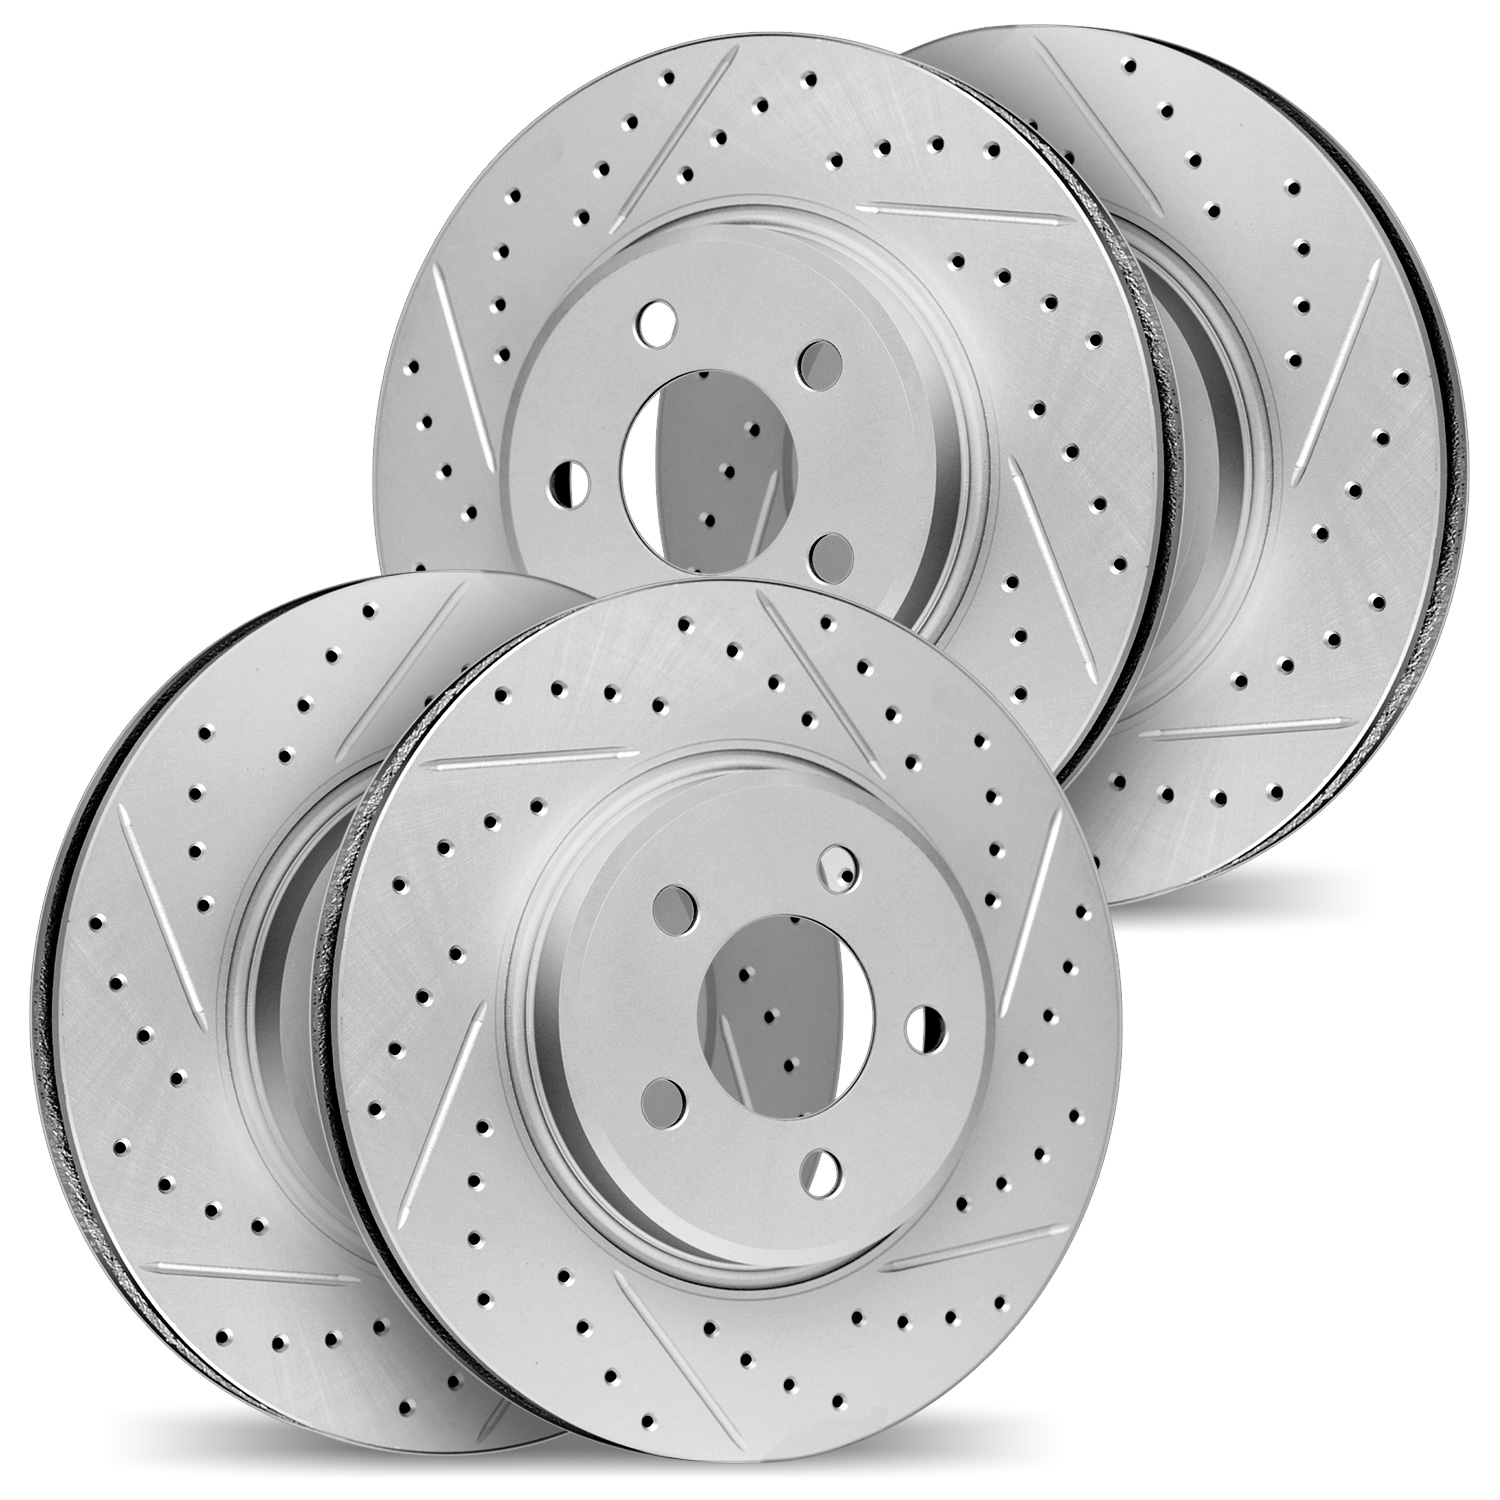 2004-02013 Geoperformance Drilled/Slotted Brake Rotors, 2019-2020 Porsche, Position: Front and Rear